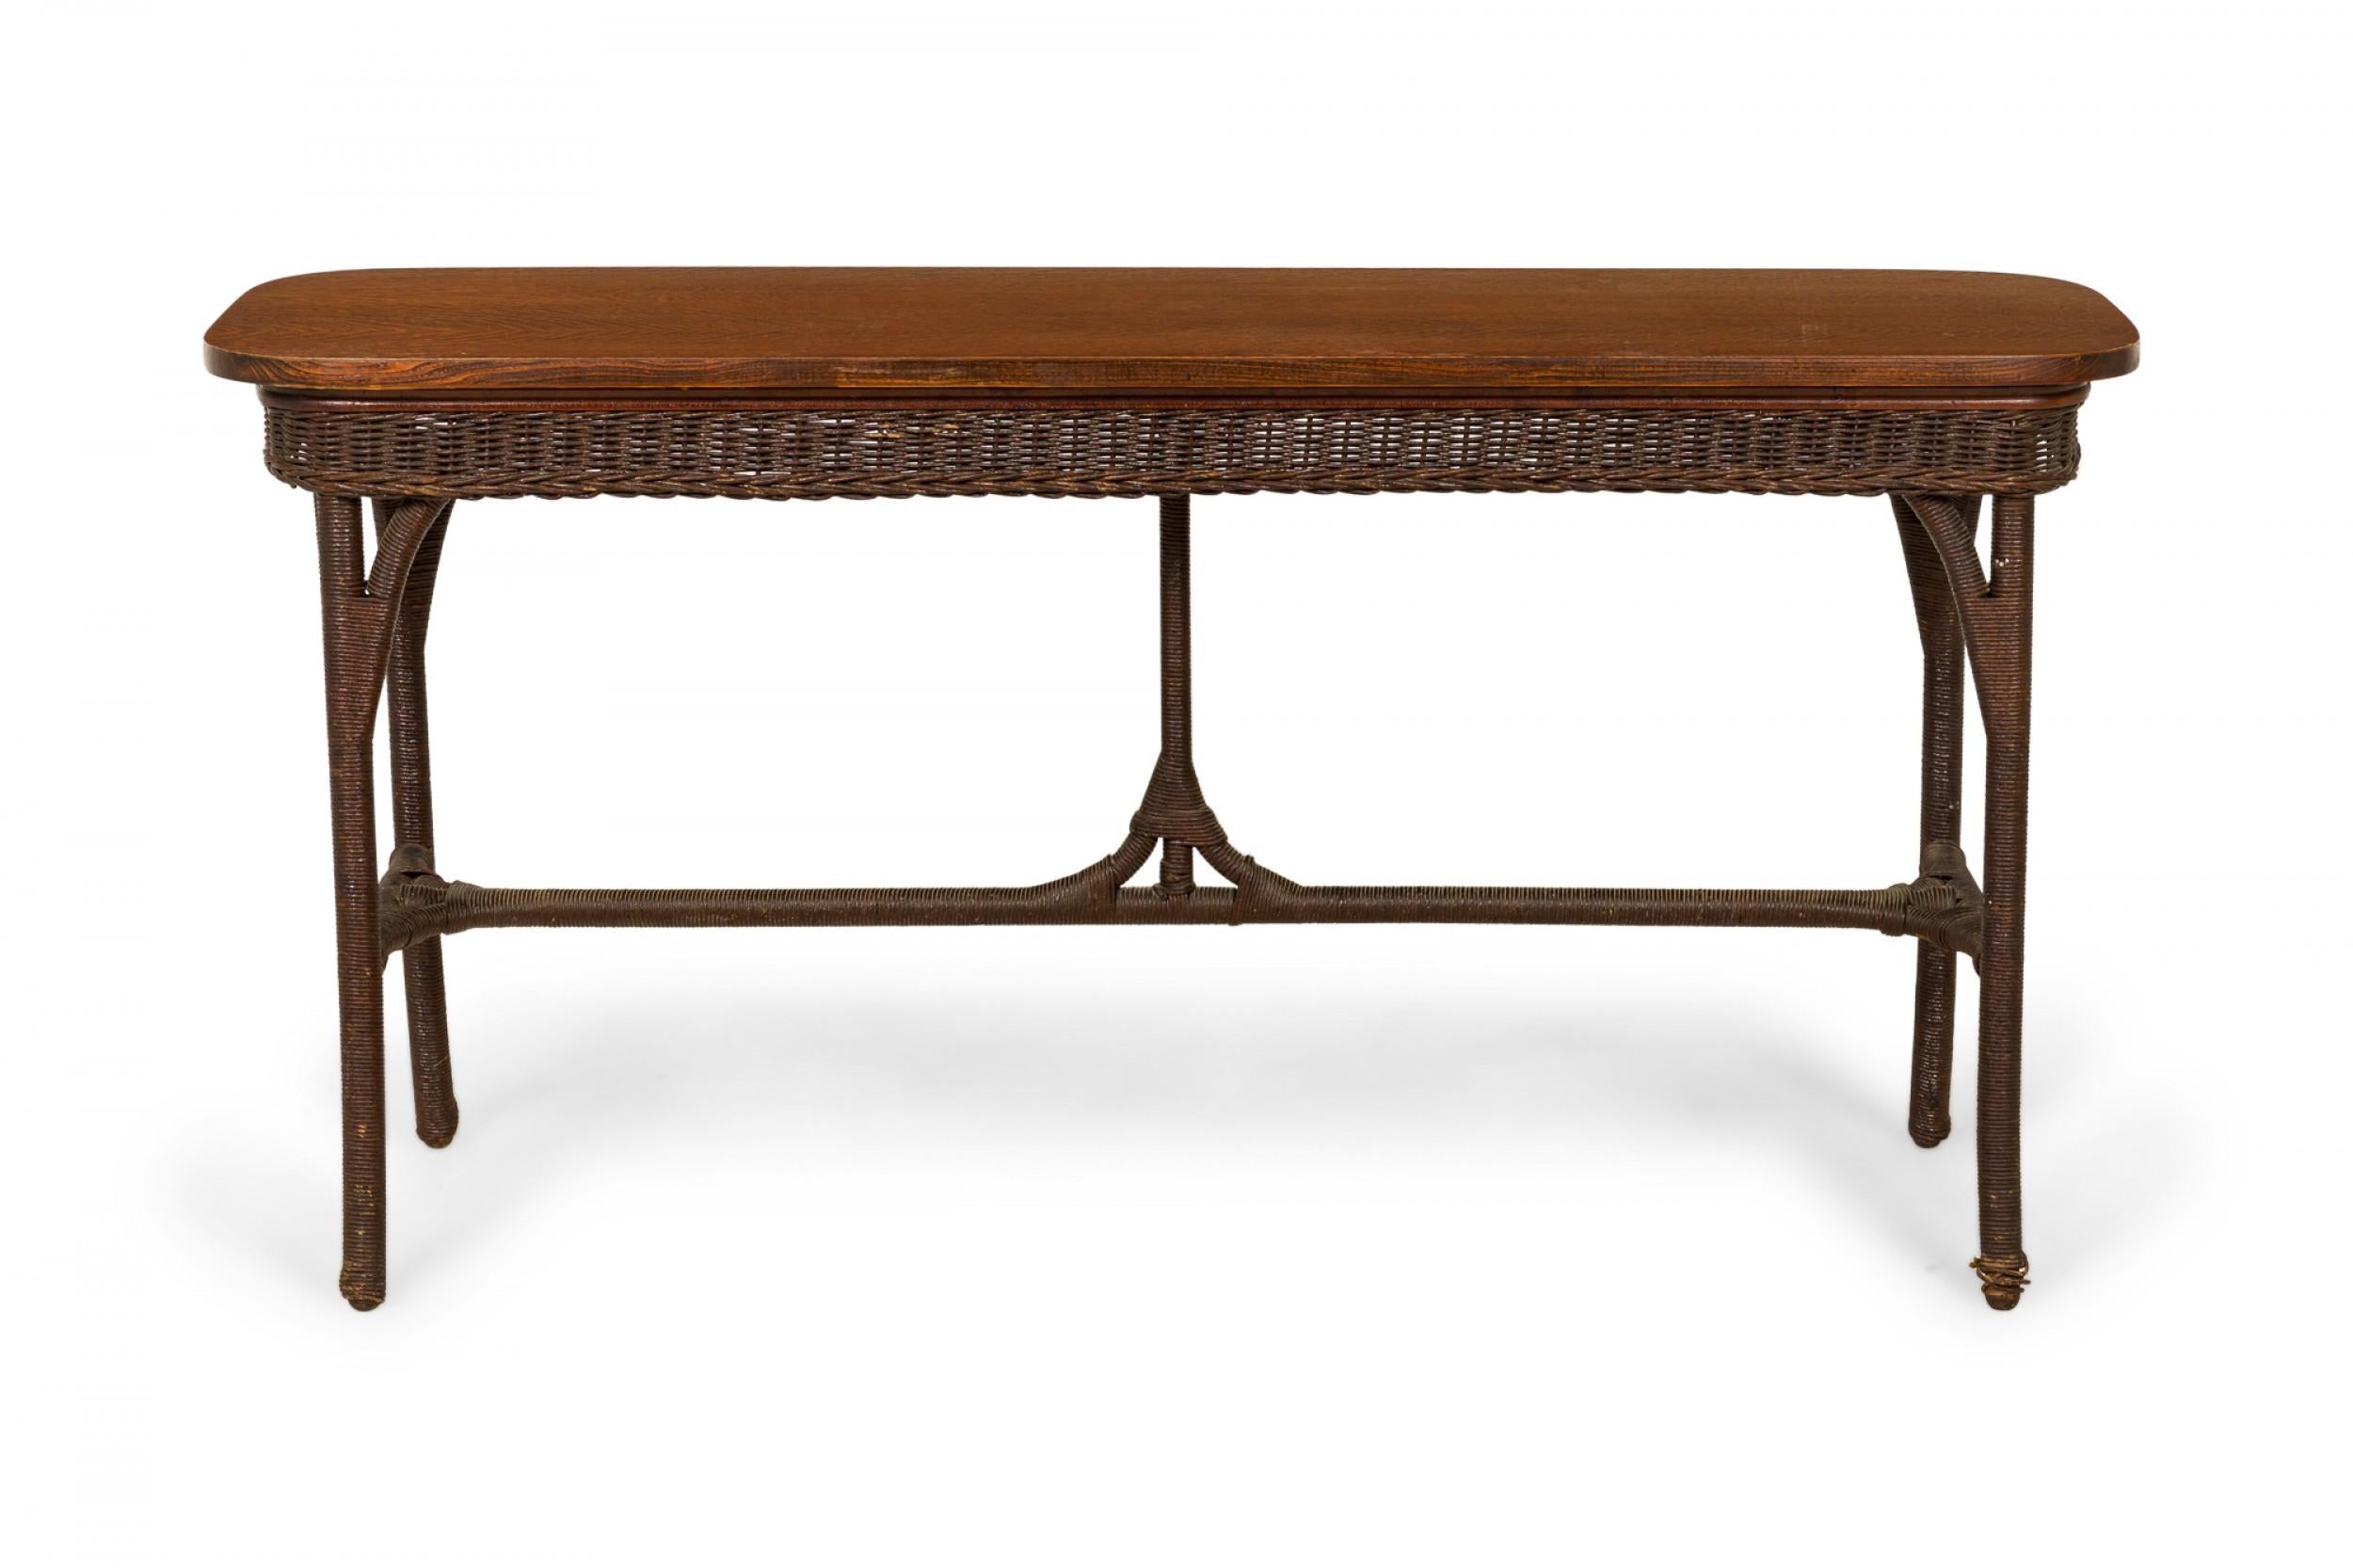 20th Century Wicker and Oak Rectangular Console / Davenport Table